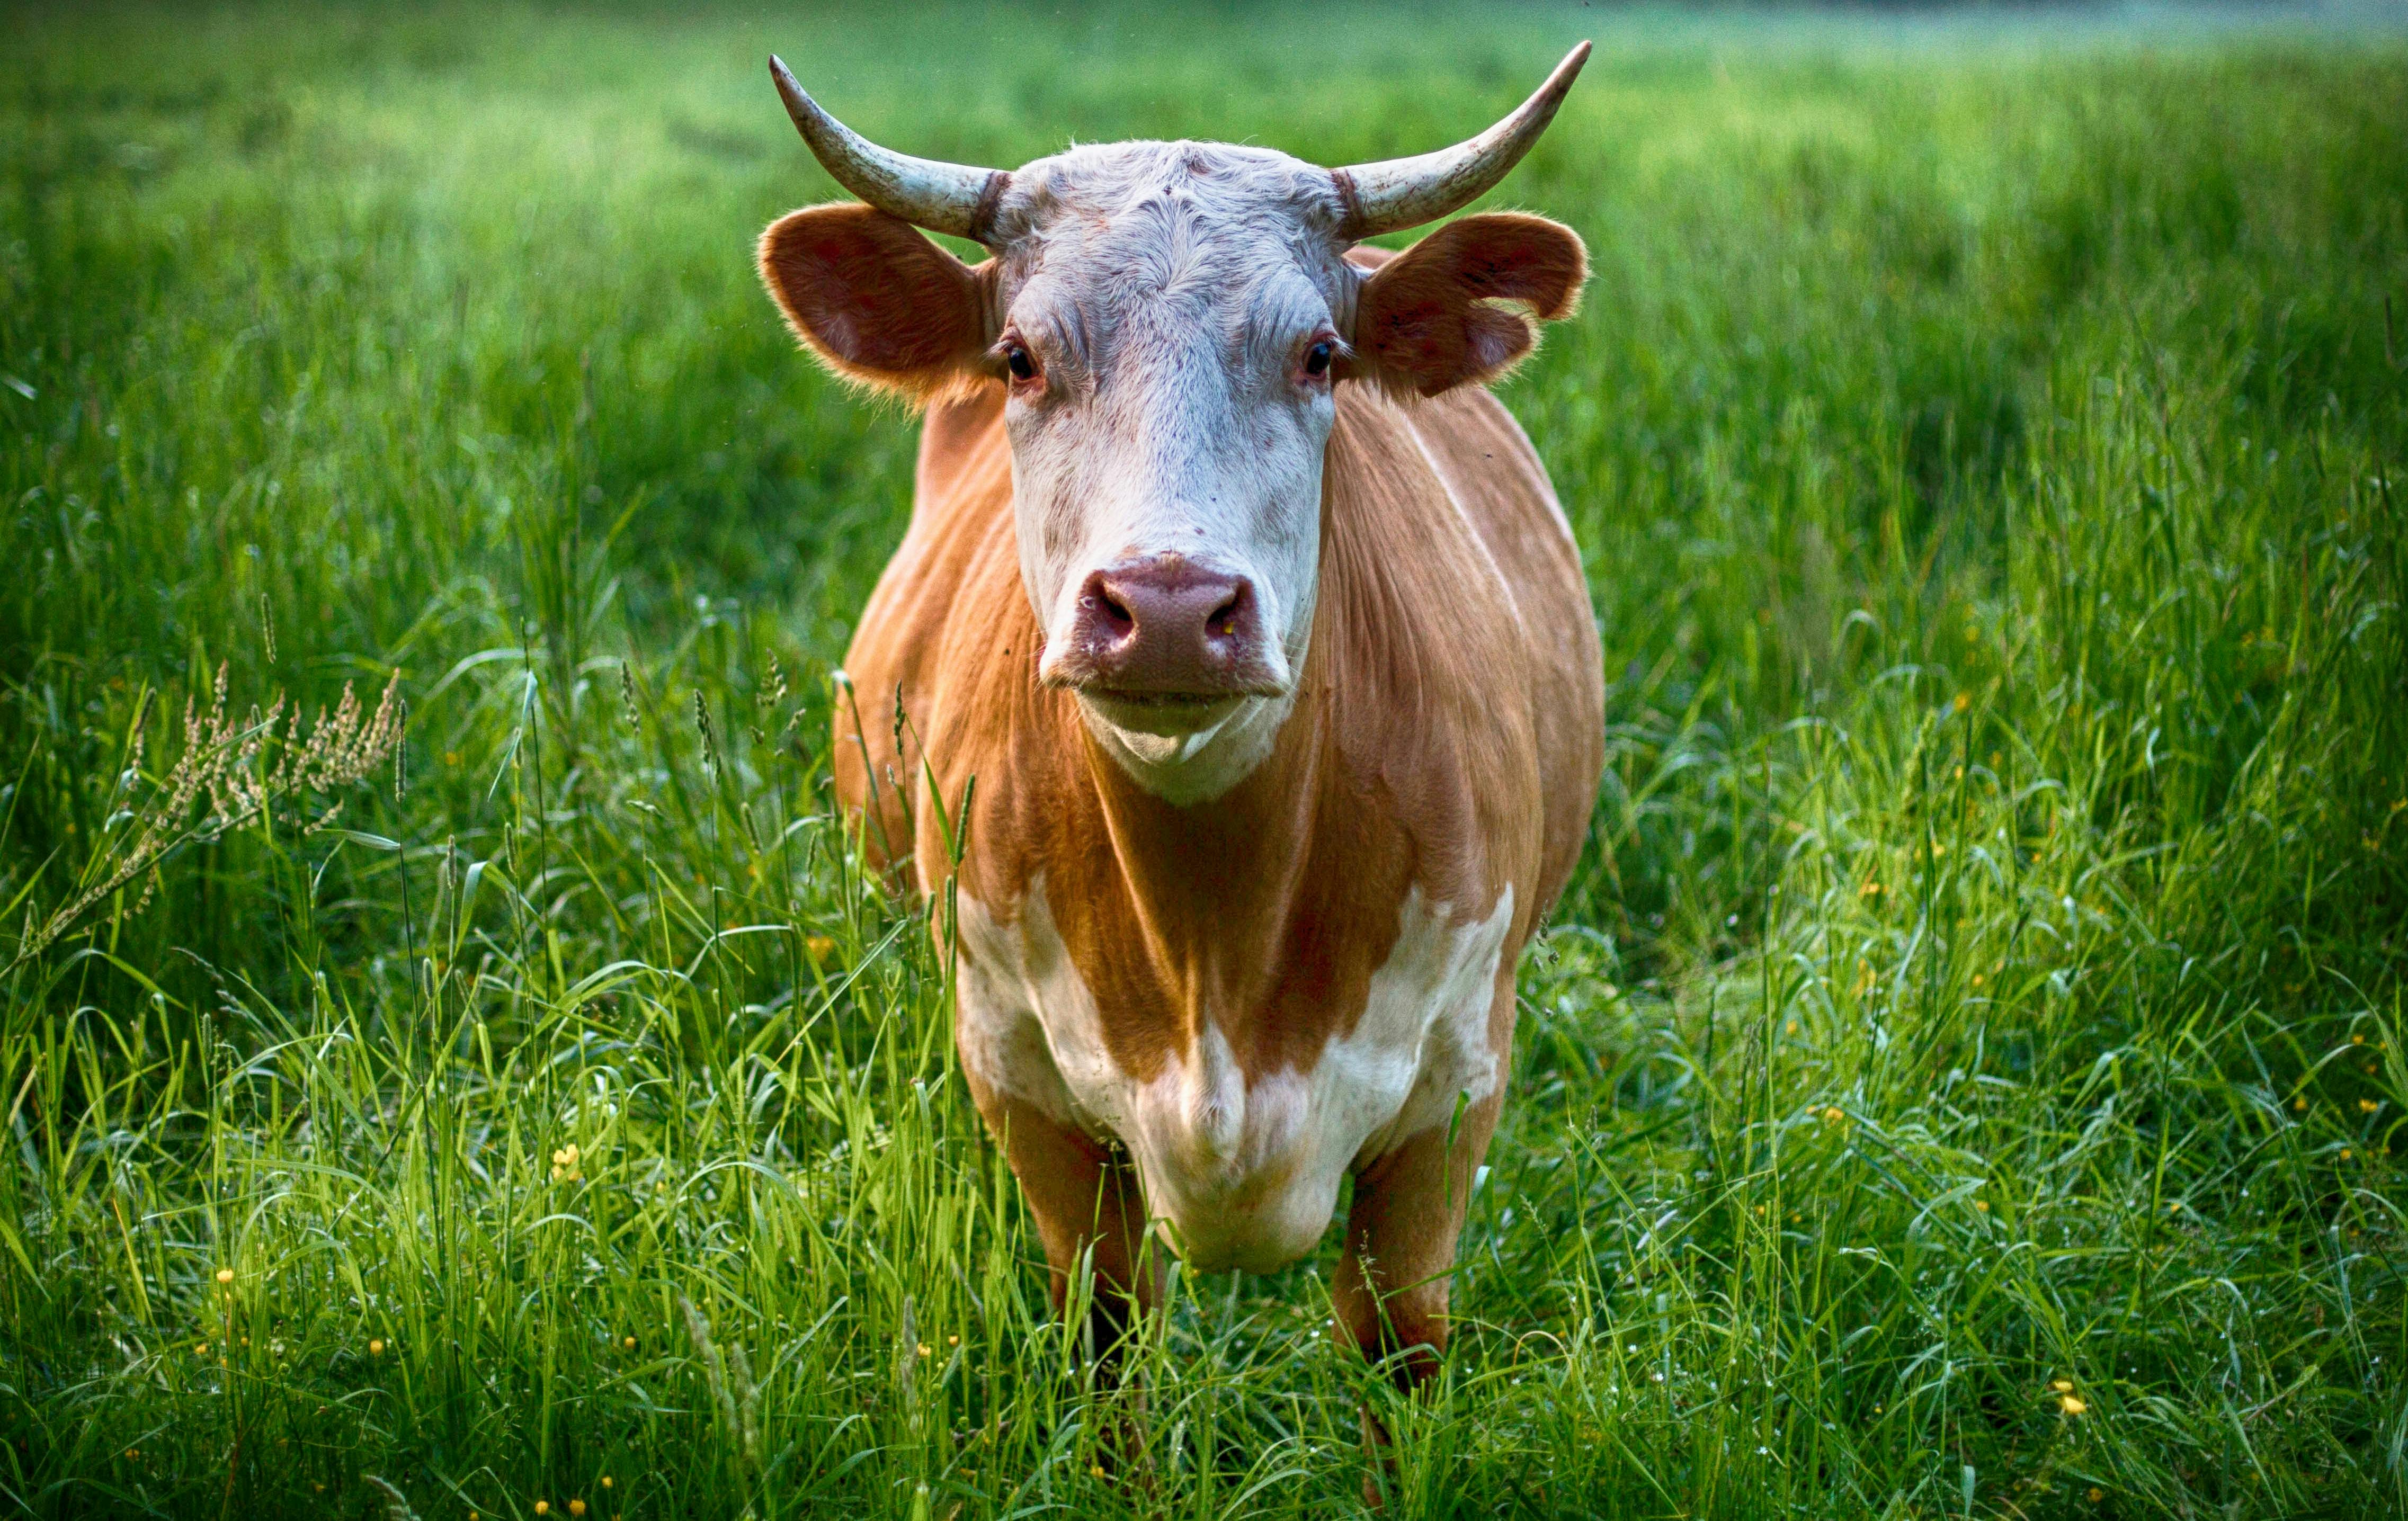 100 Peaceful Cow Pictures · Pexels · Free Stock Photos